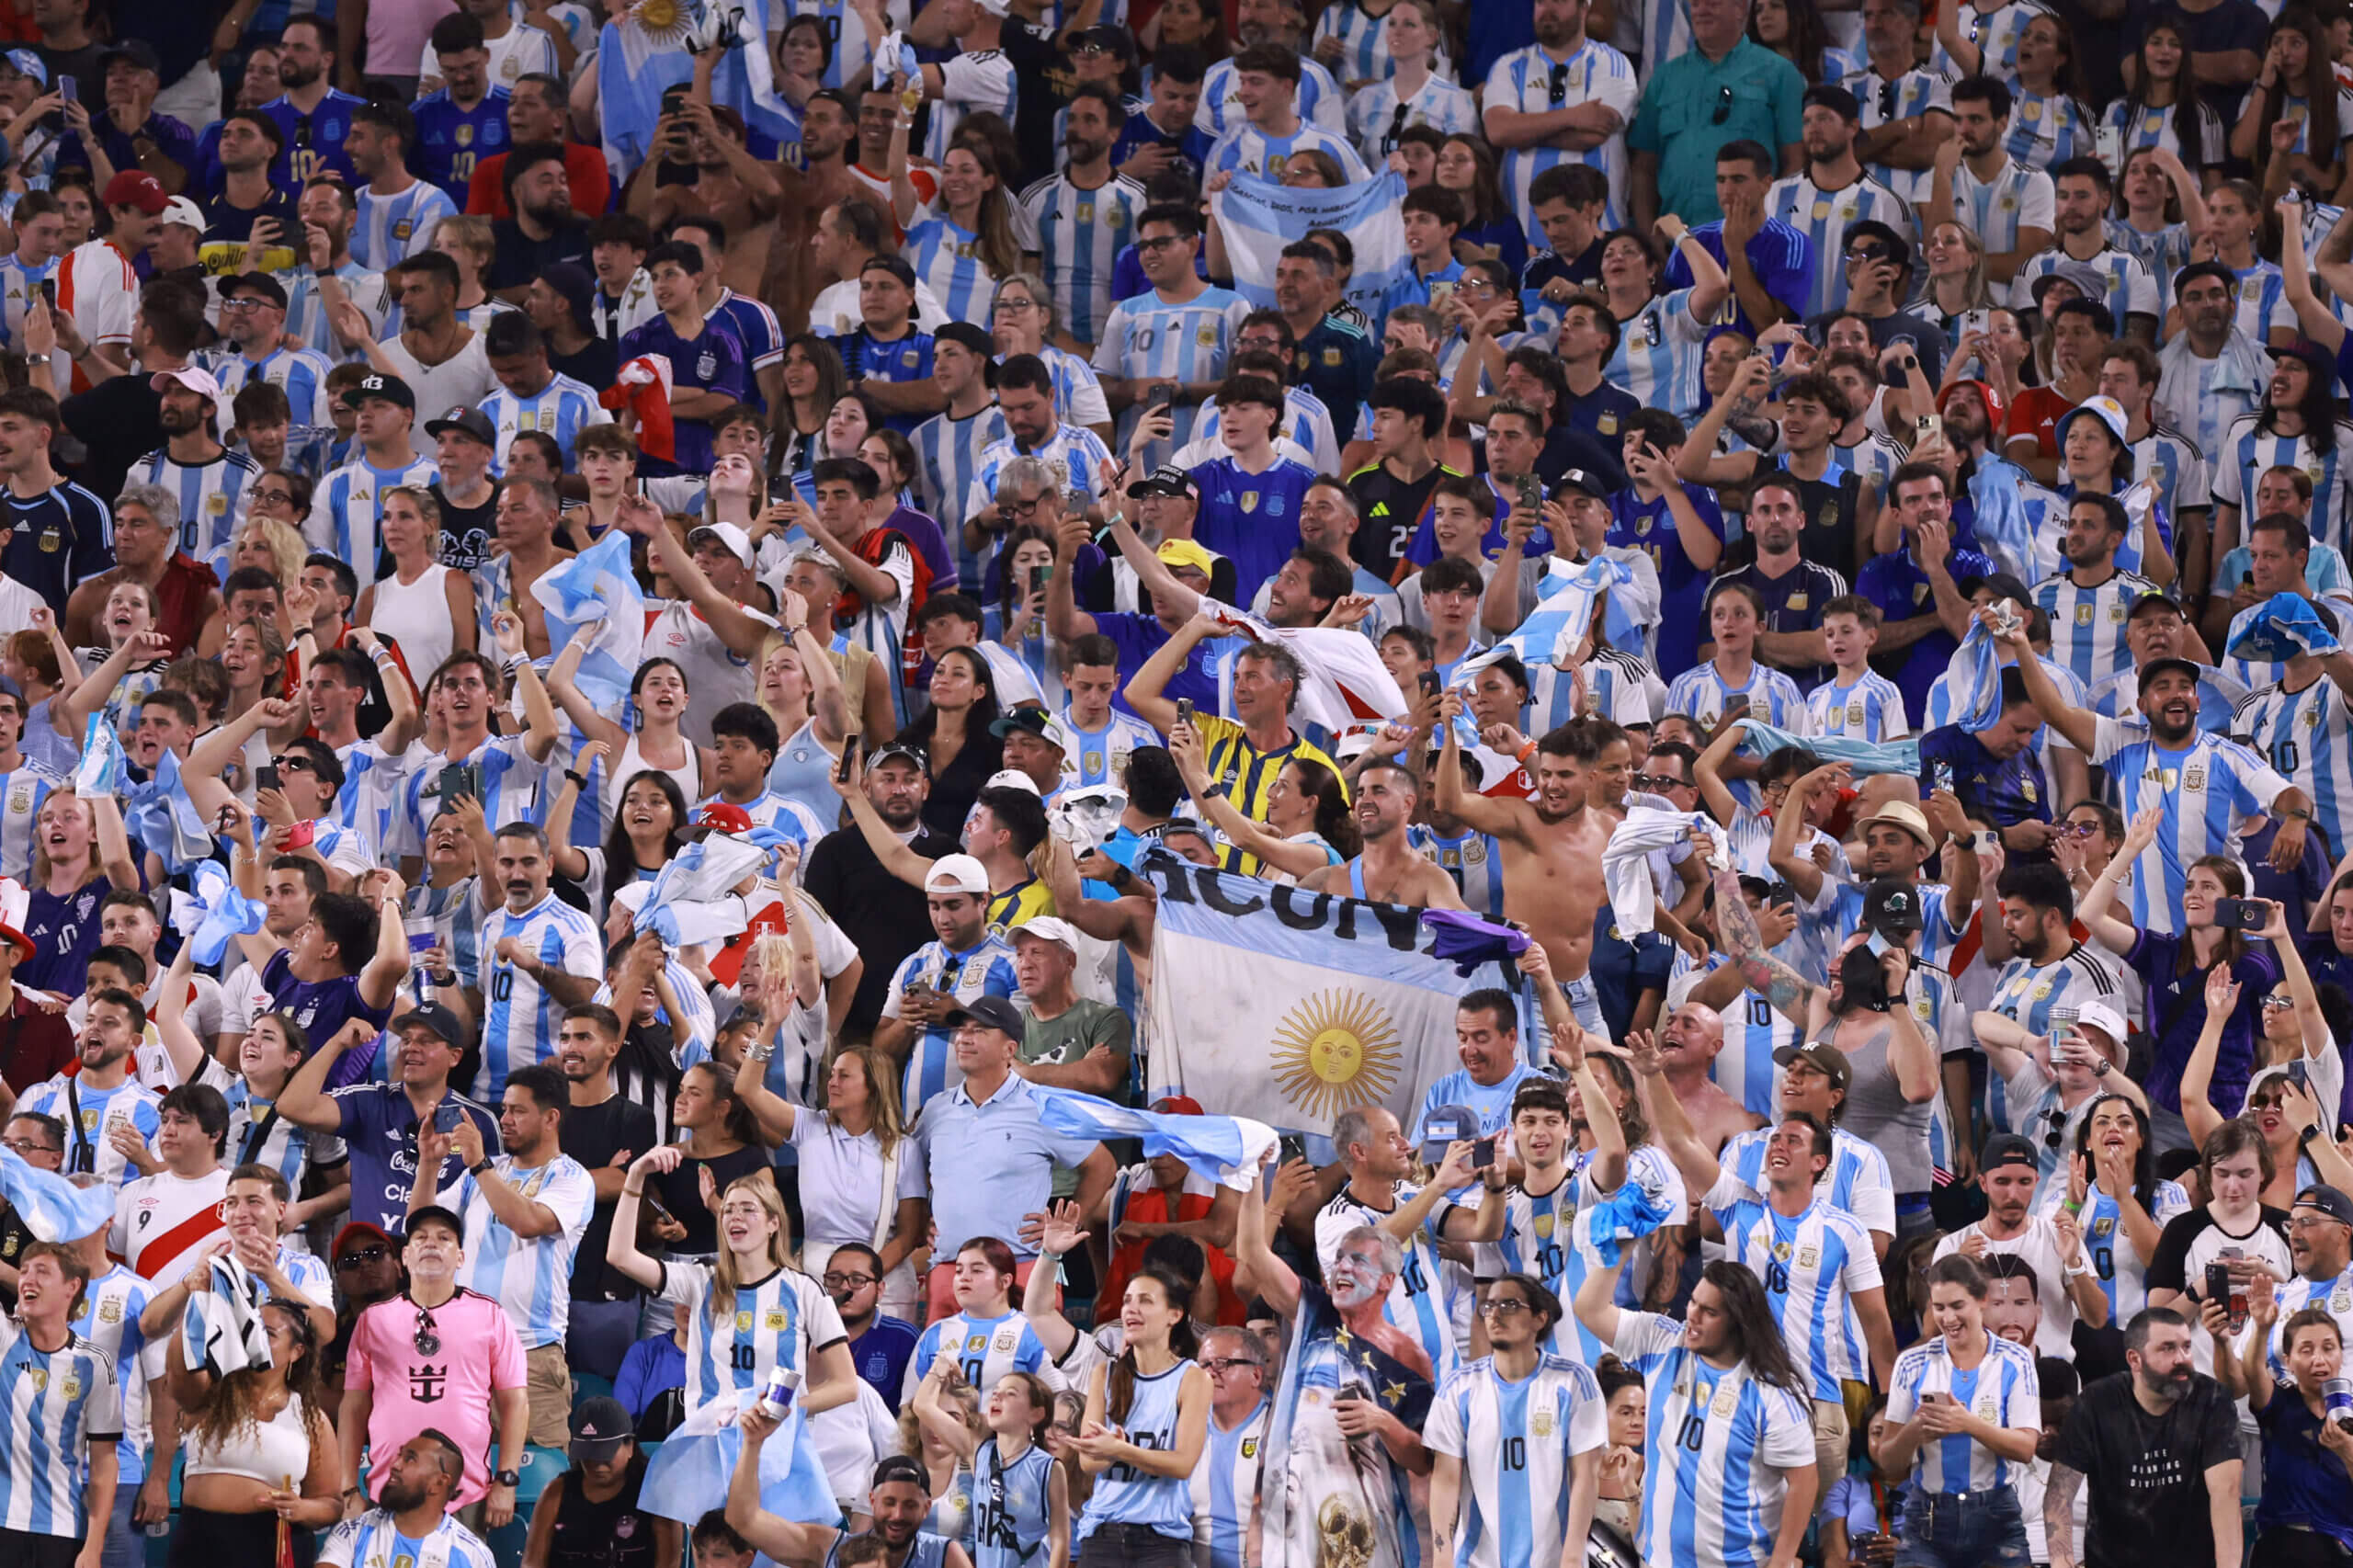 Are the $200 tickets and empty seats for the Copa America a missed opportunity in the run-up to the World Cup?